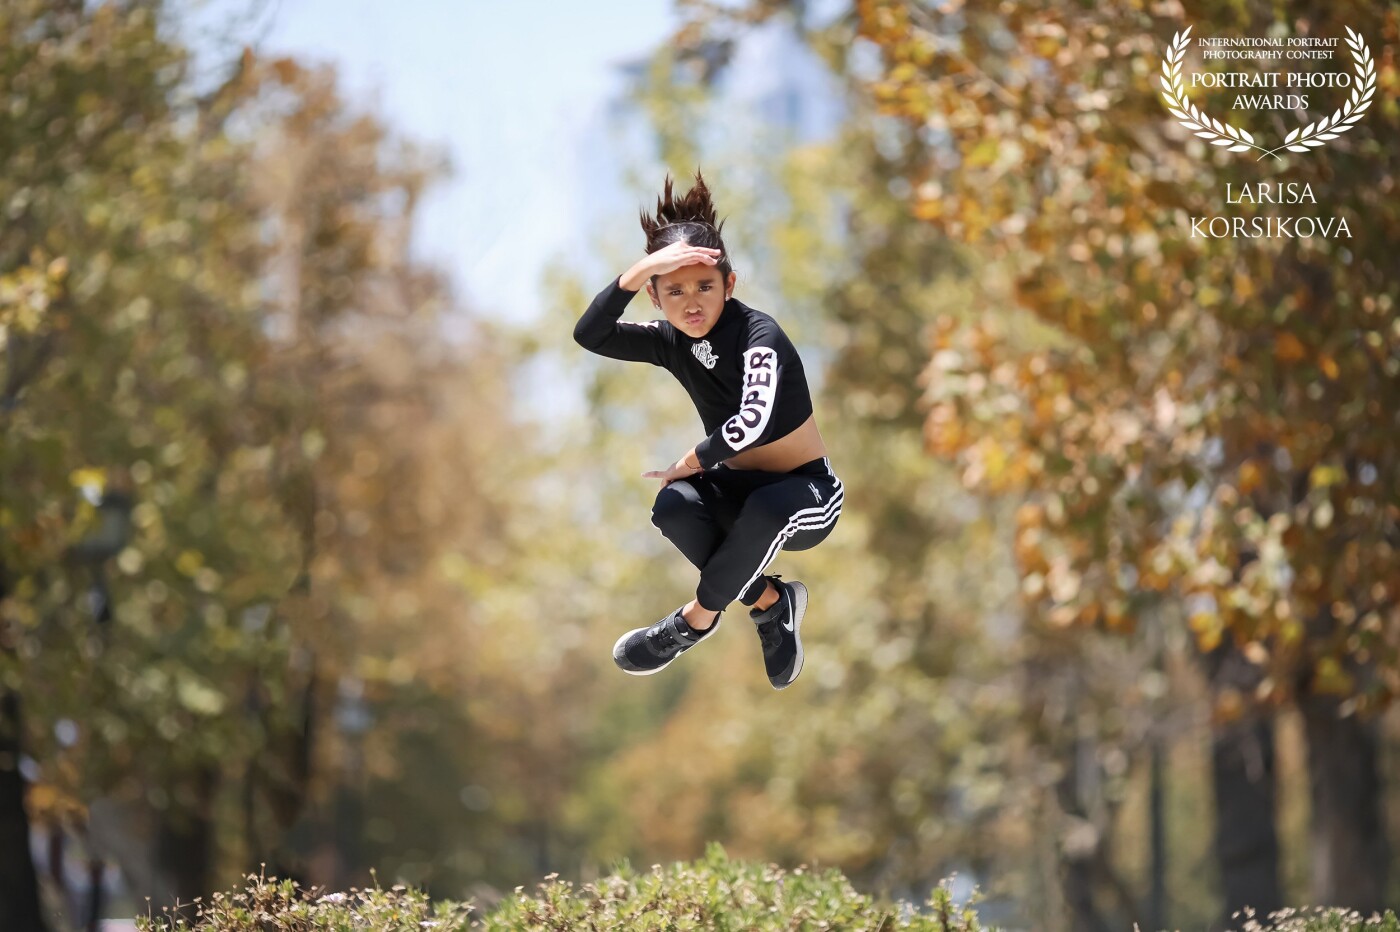 Very talented young ballerina Emilia, 8 years old @emilia_ko7. Some people might say that is Photoshop, but she is jumping here, so it is pretty natural. She can jump really high!!! 